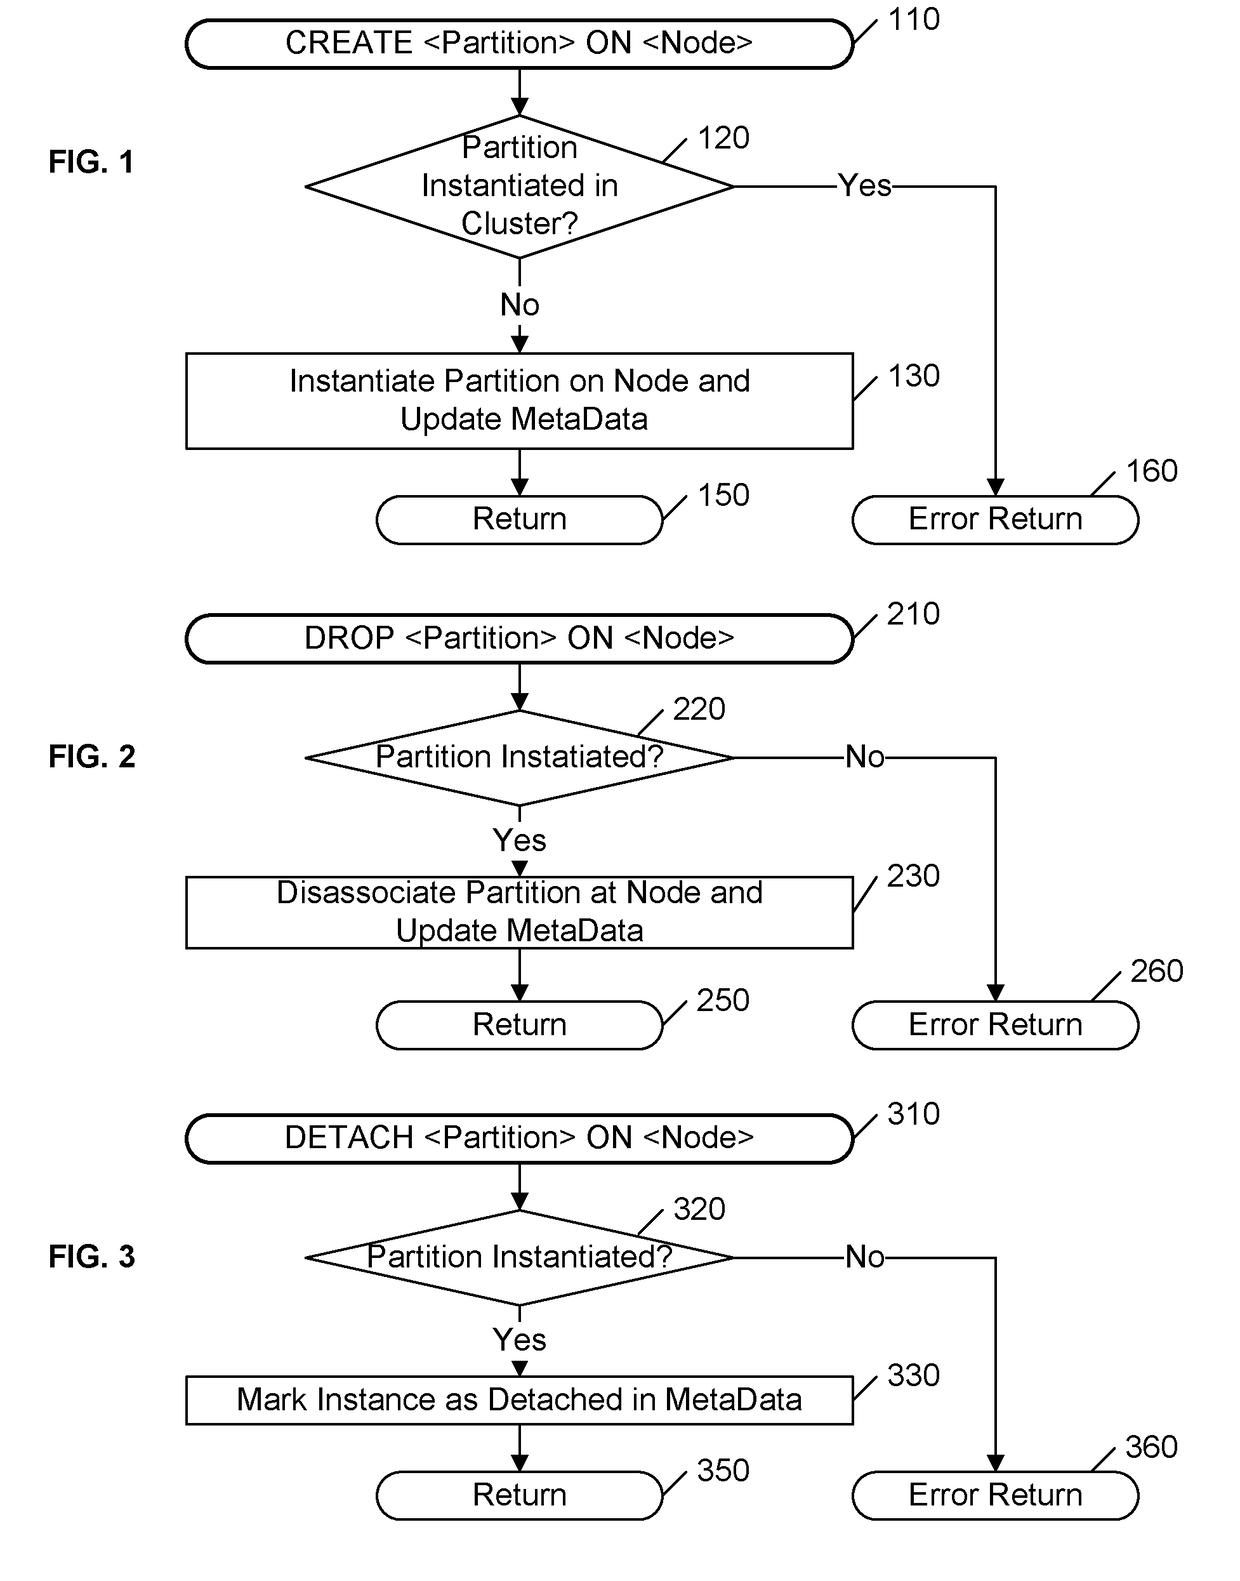 Atomic clustering operations for managing a partitioned cluster online